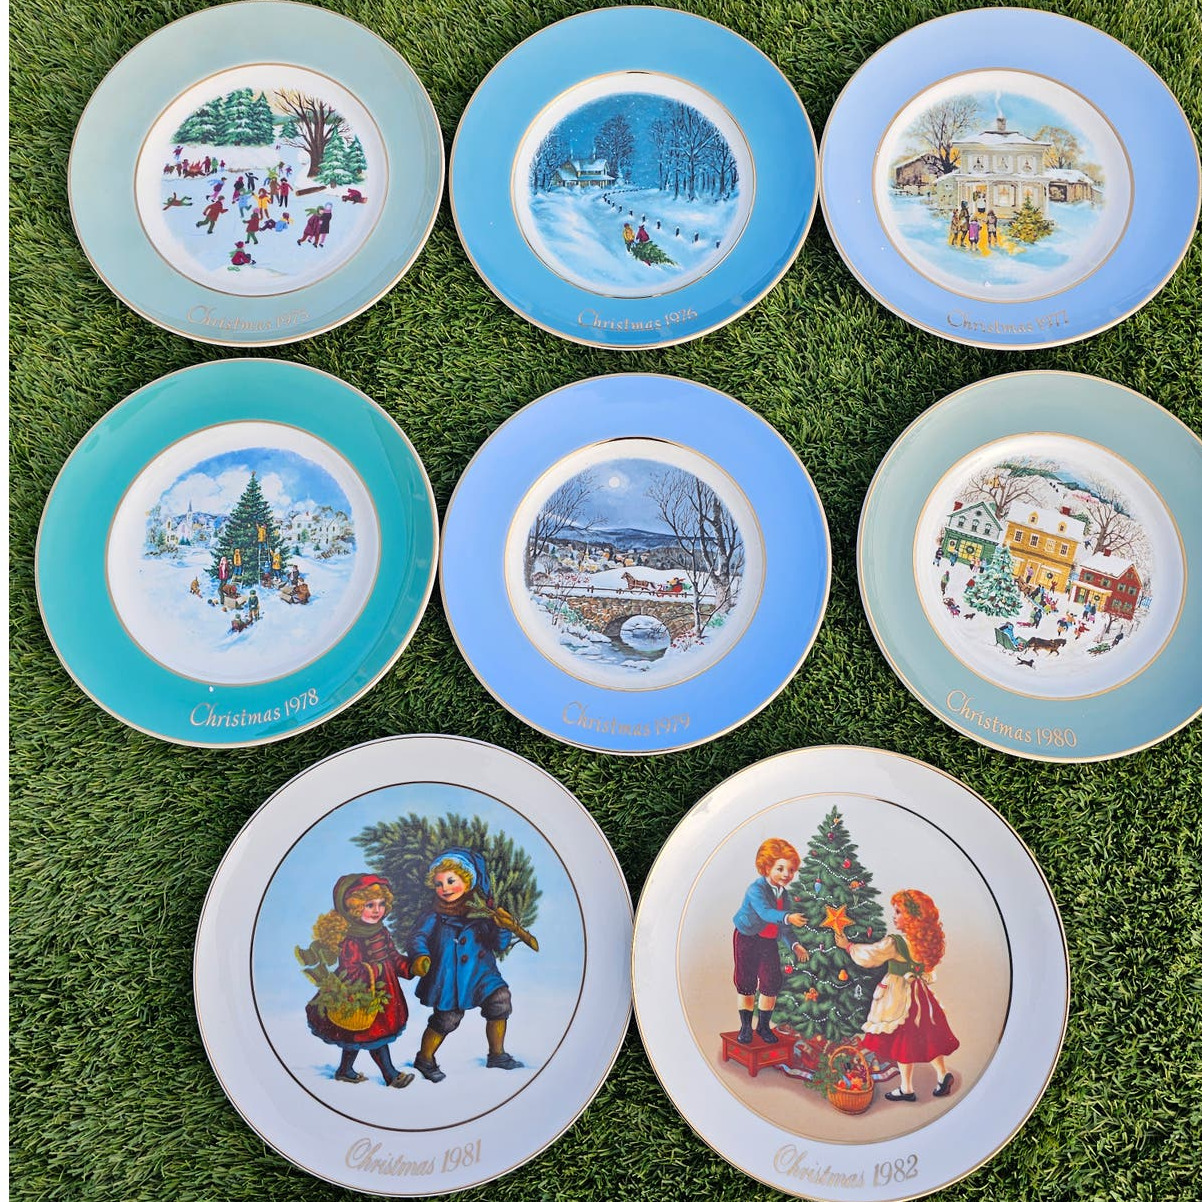 Lot of 8 Vintage Avon Christmas Scene Porcelain Plates 1970s and 1980s